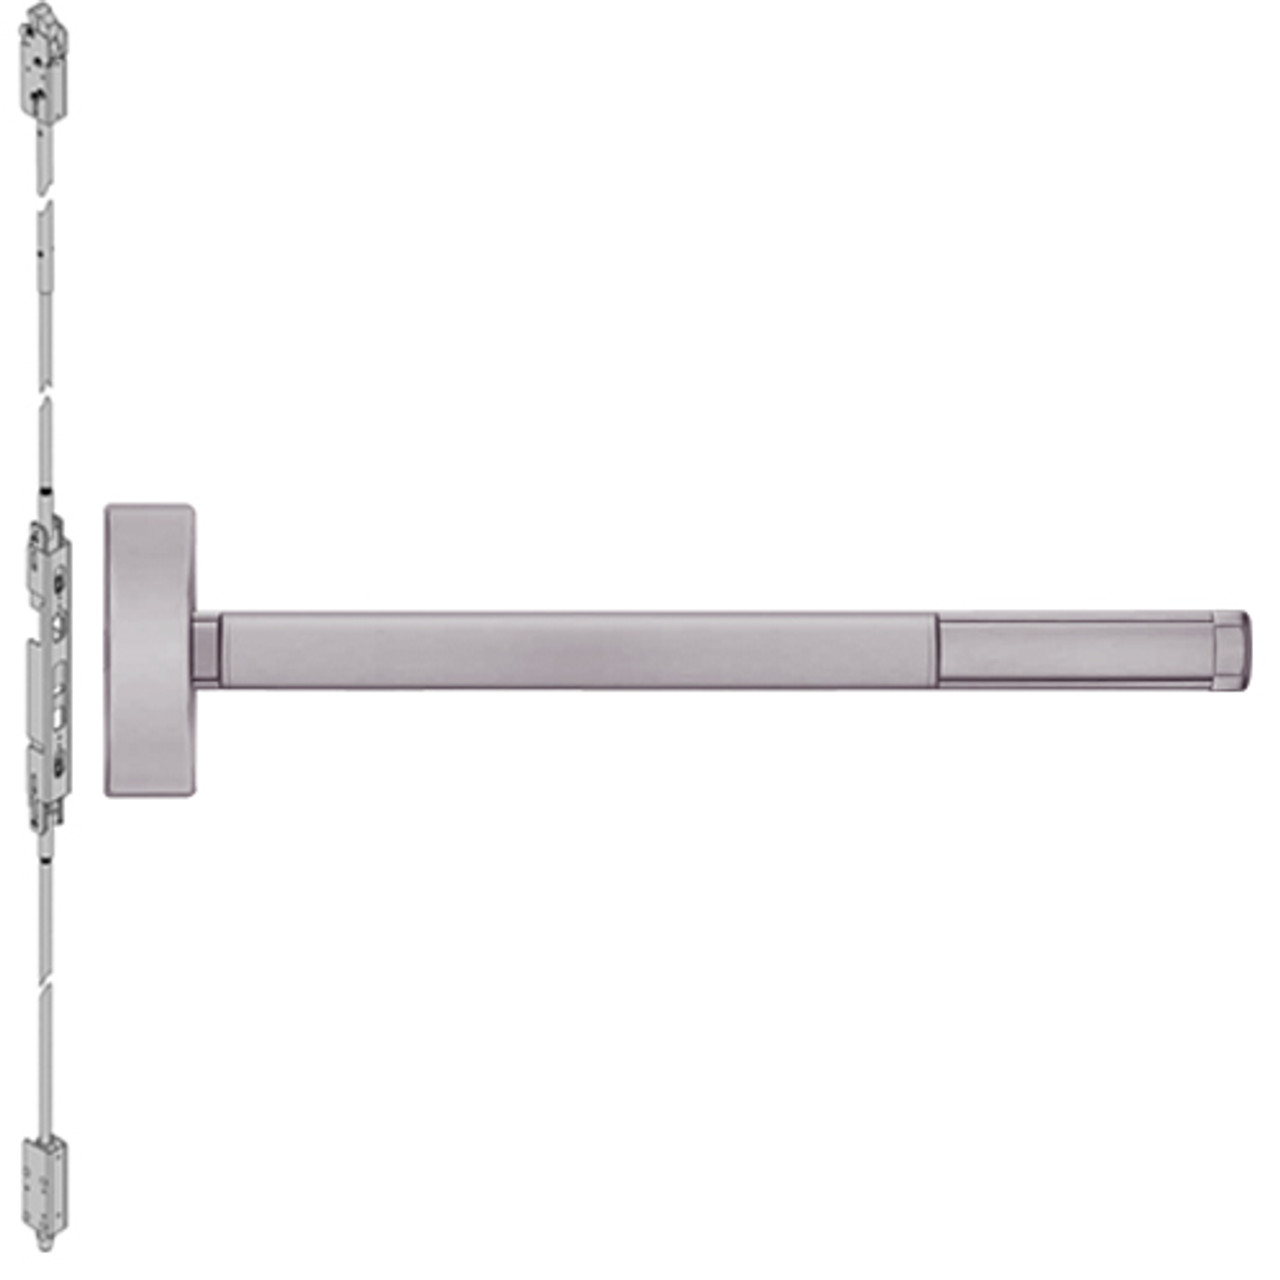 DEFL2801LBR-630-36 PHI 2800 Series Fire Rated Concealed Vertical Rod Exit Device with Delayed Egress Prepped for Cover Plate in Satin Stainless Steel Finish